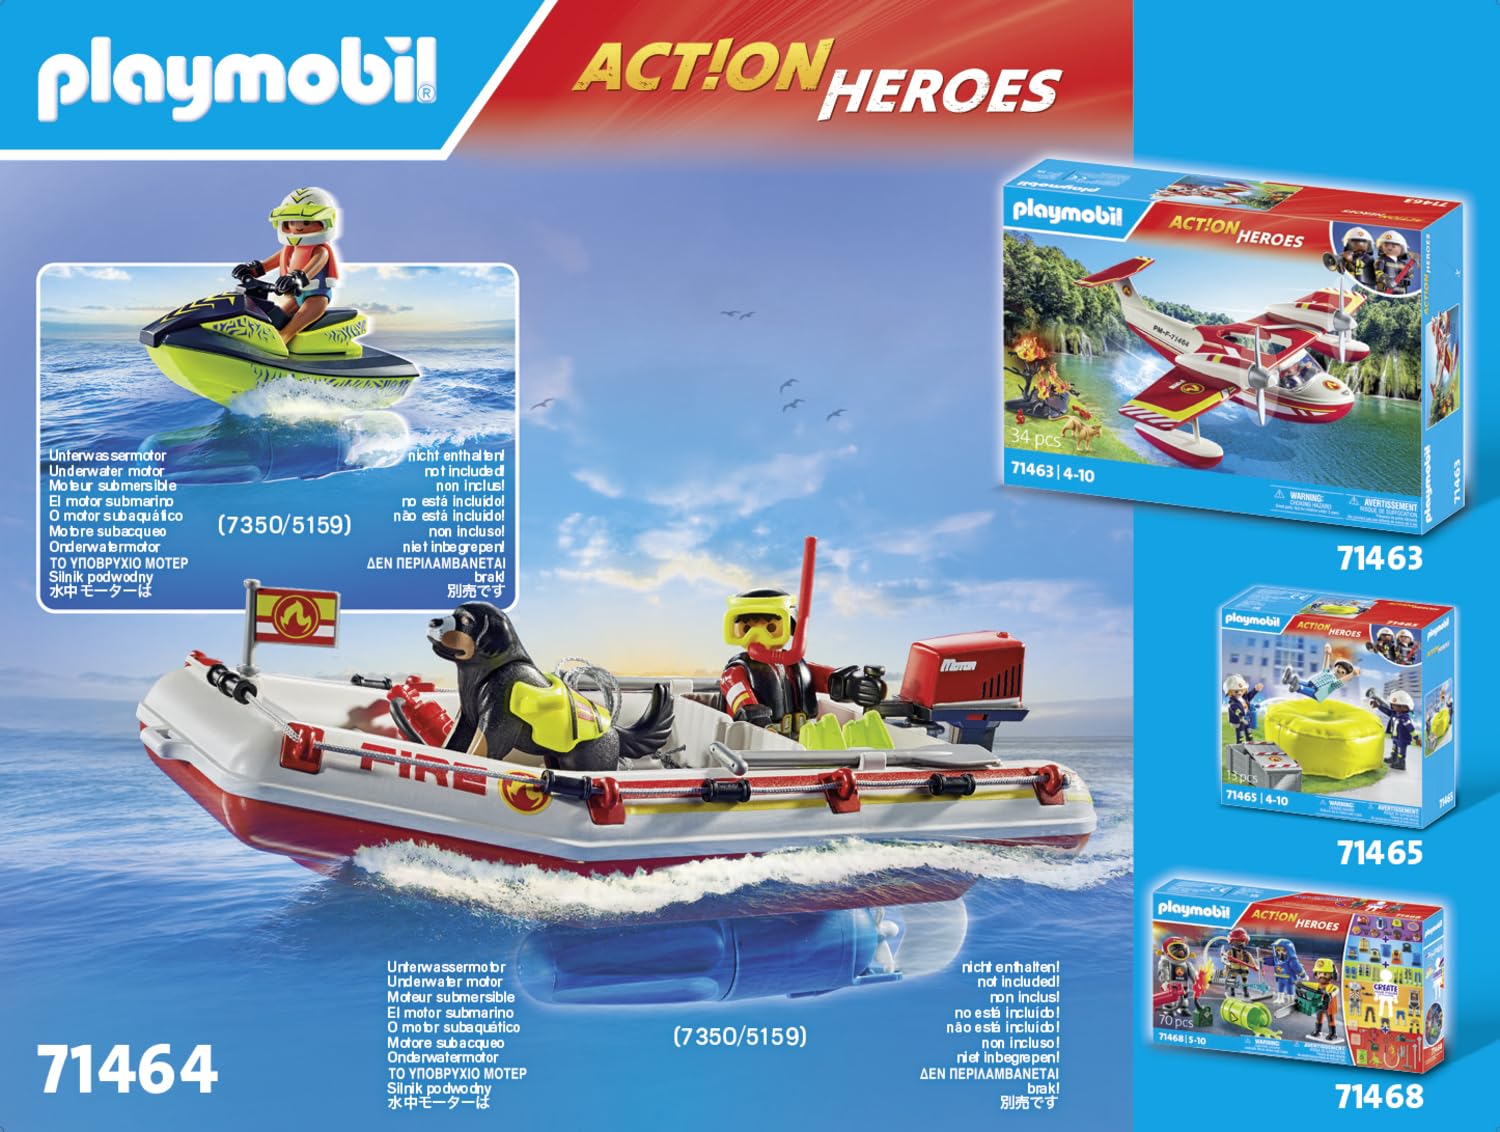 Playmobil 71464 Action Heroes: Fireboat with Water Scooter, exciting Water Rescue, Fun Imaginative Role Play, Realistic playsets Suitable for Children Ages 4+